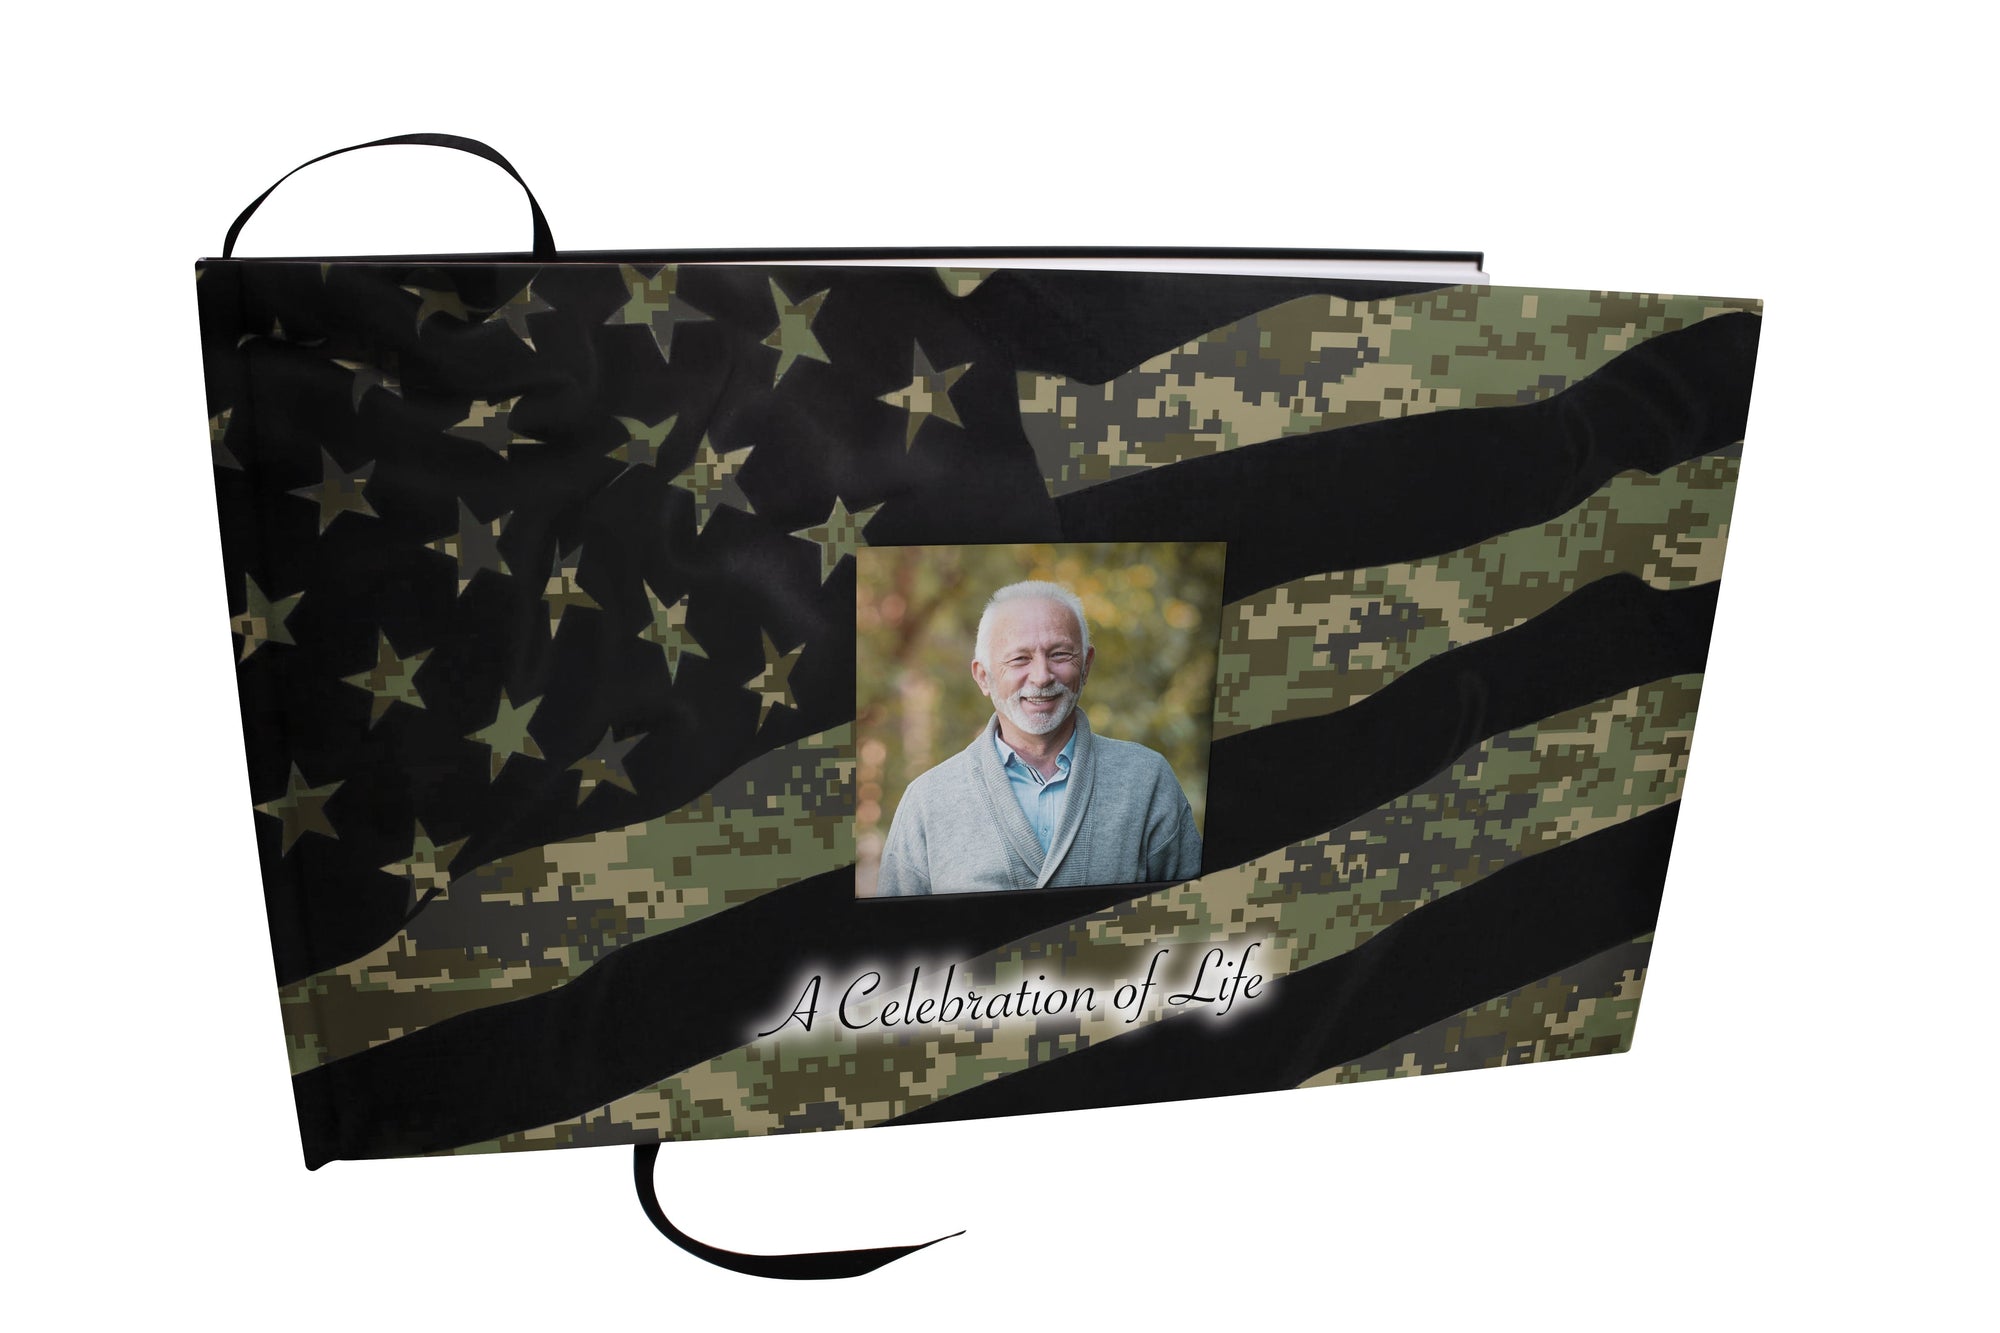 Commemorative Cremation Urns Digital Camouflage Matching Themed 'Celebration of Life' Guest Book for Funeral or Memorial Service